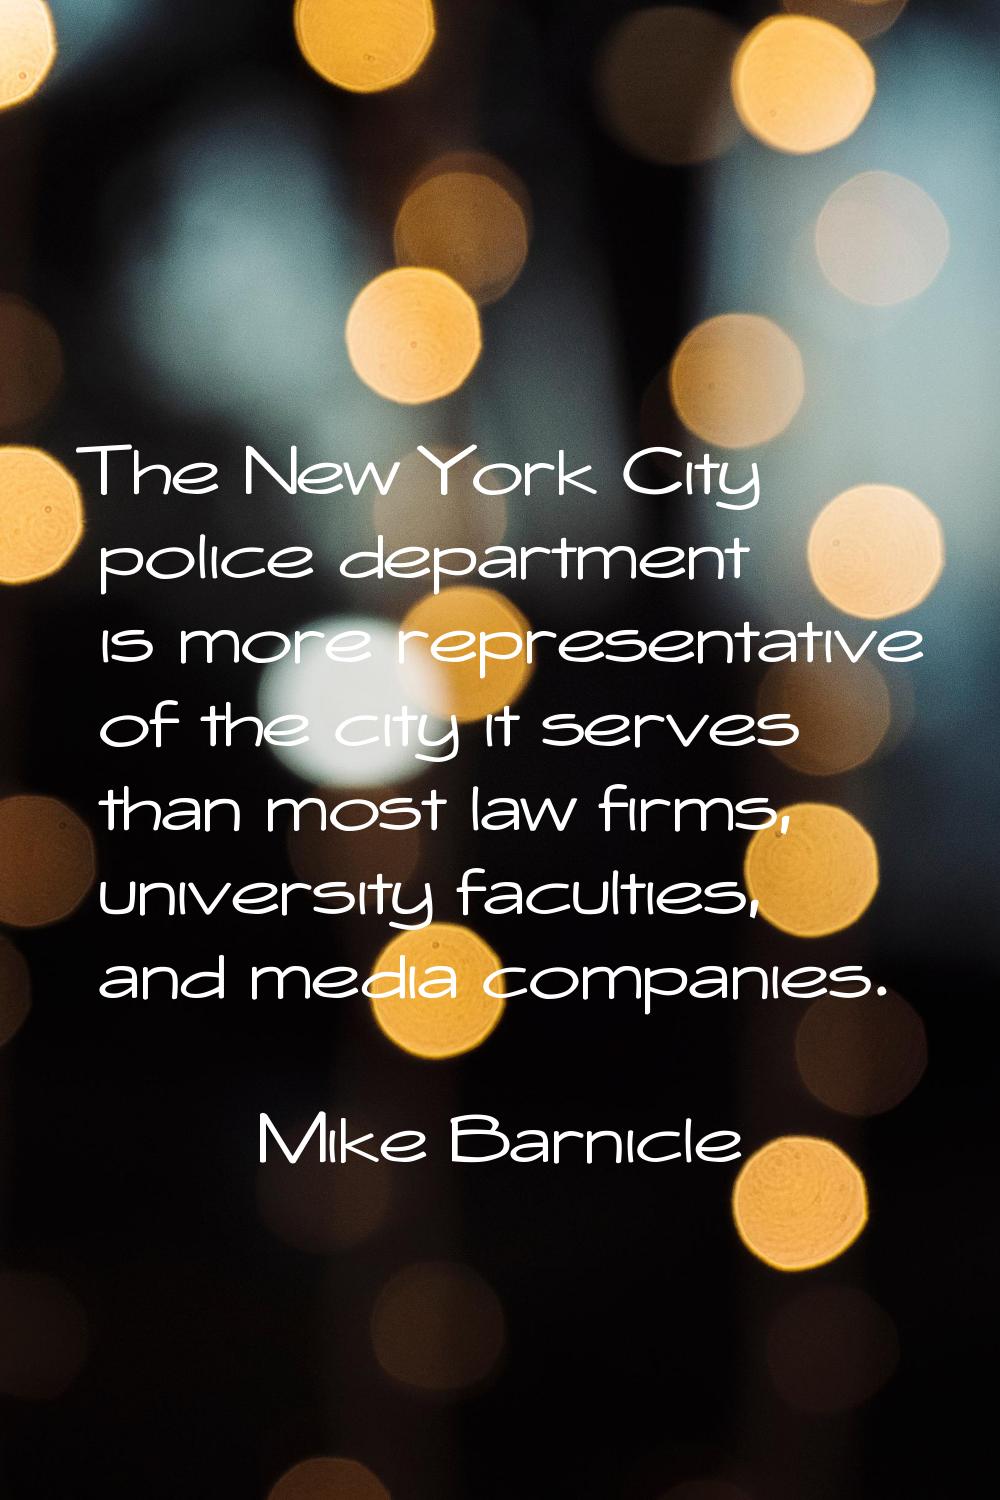 The New York City police department is more representative of the city it serves than most law firm